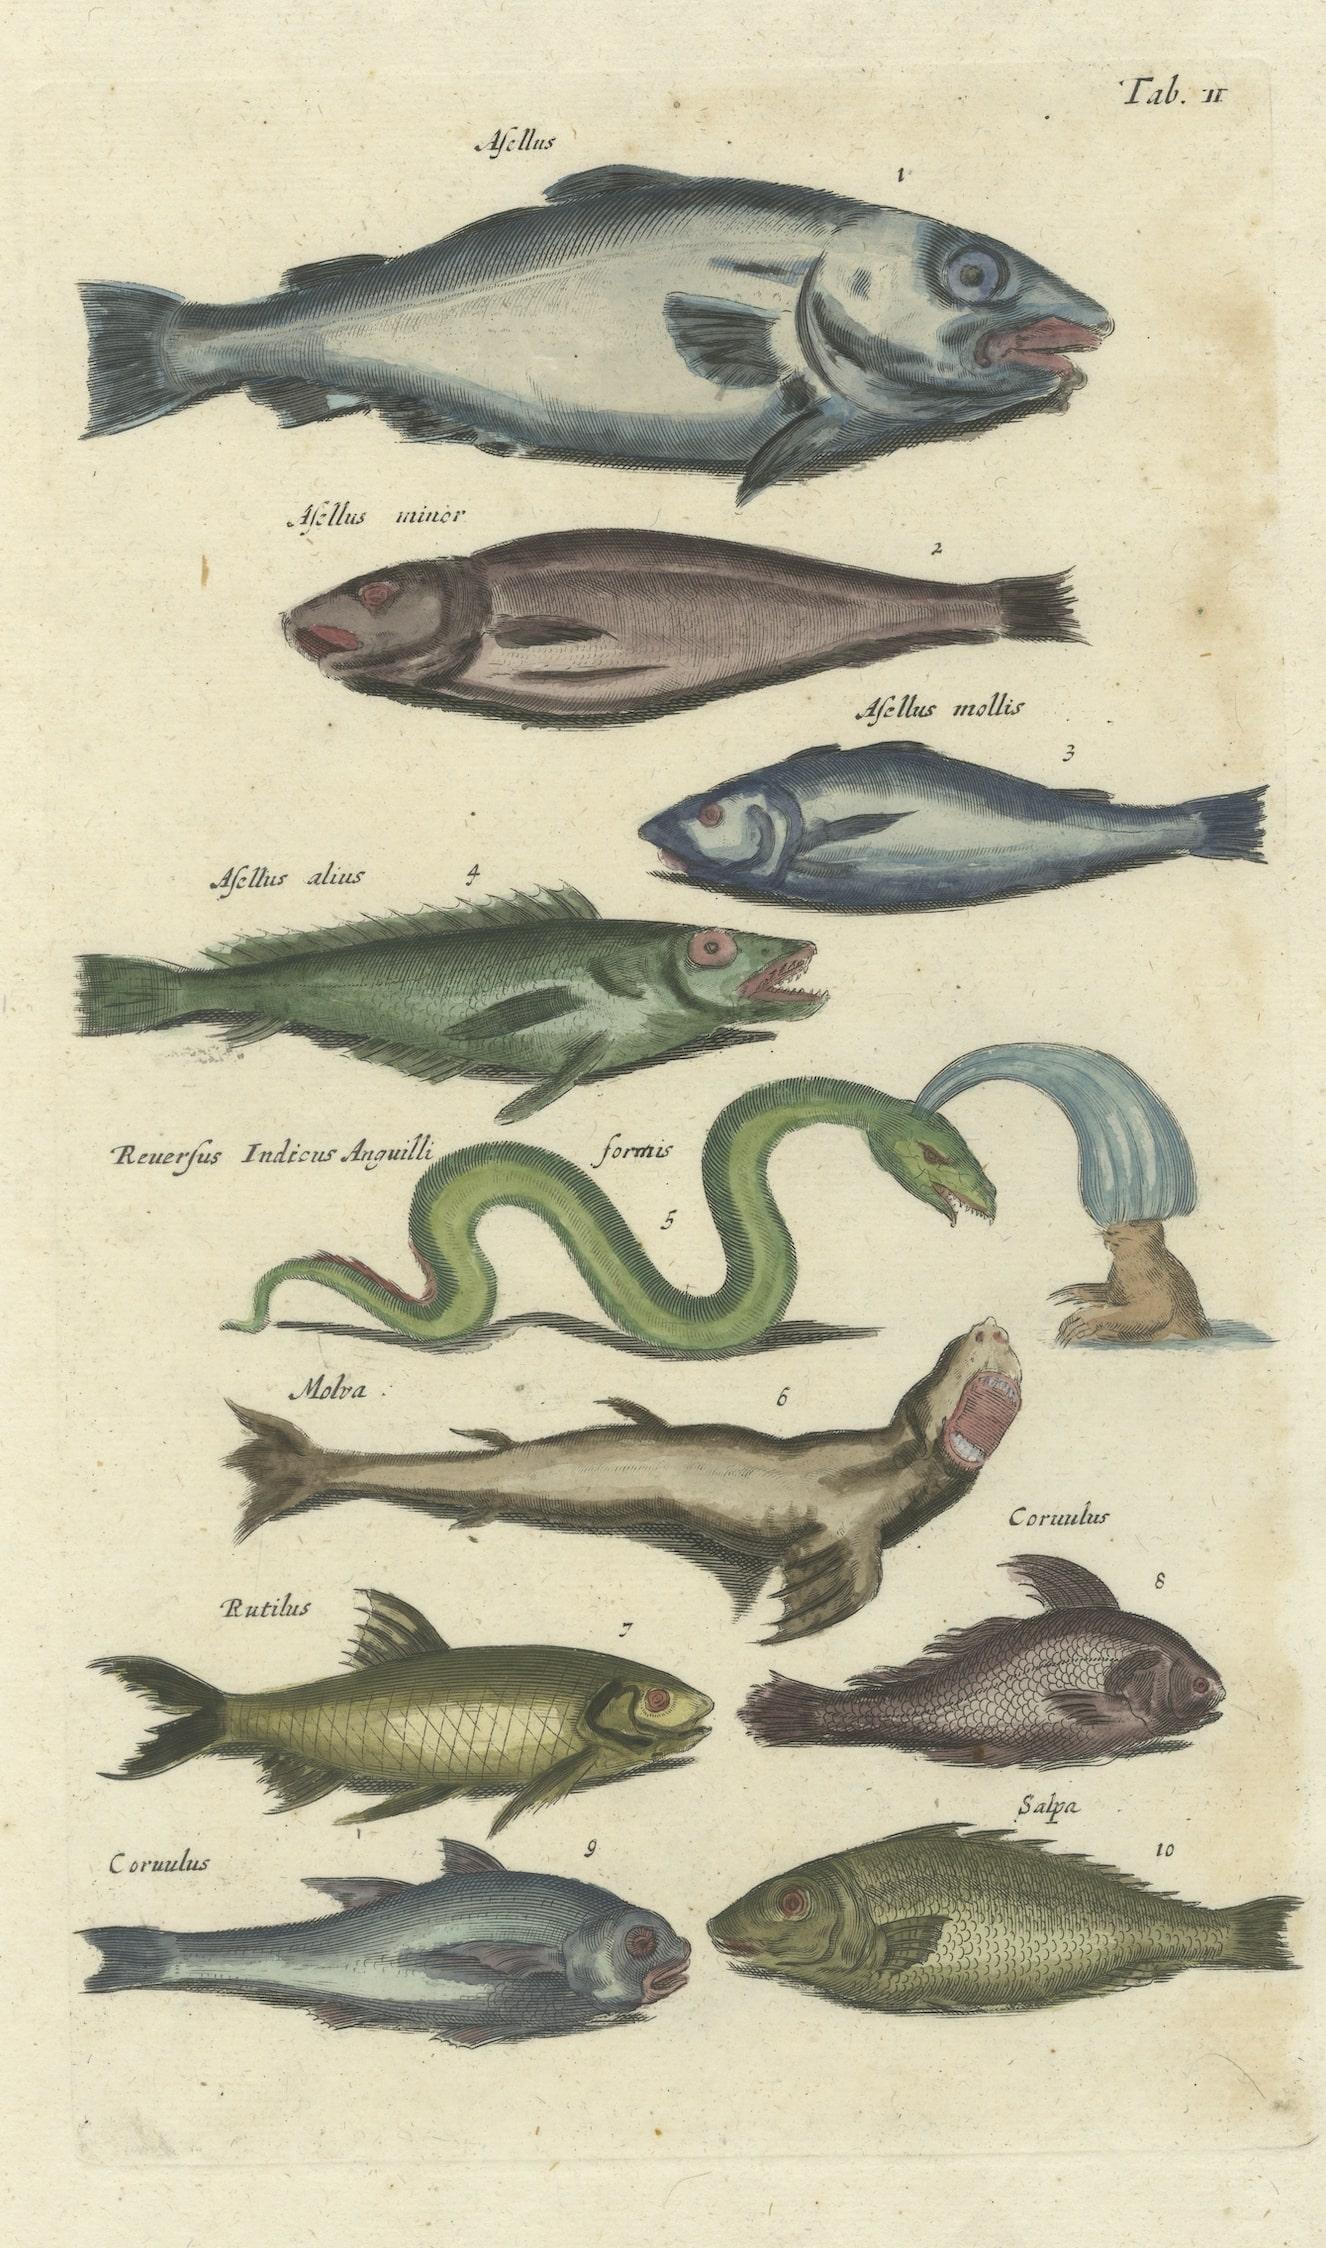 Antique print of illustrating several fish species including a roach and sea snake. These rare hand colored copperplate engraving has been selected from a work entitled 